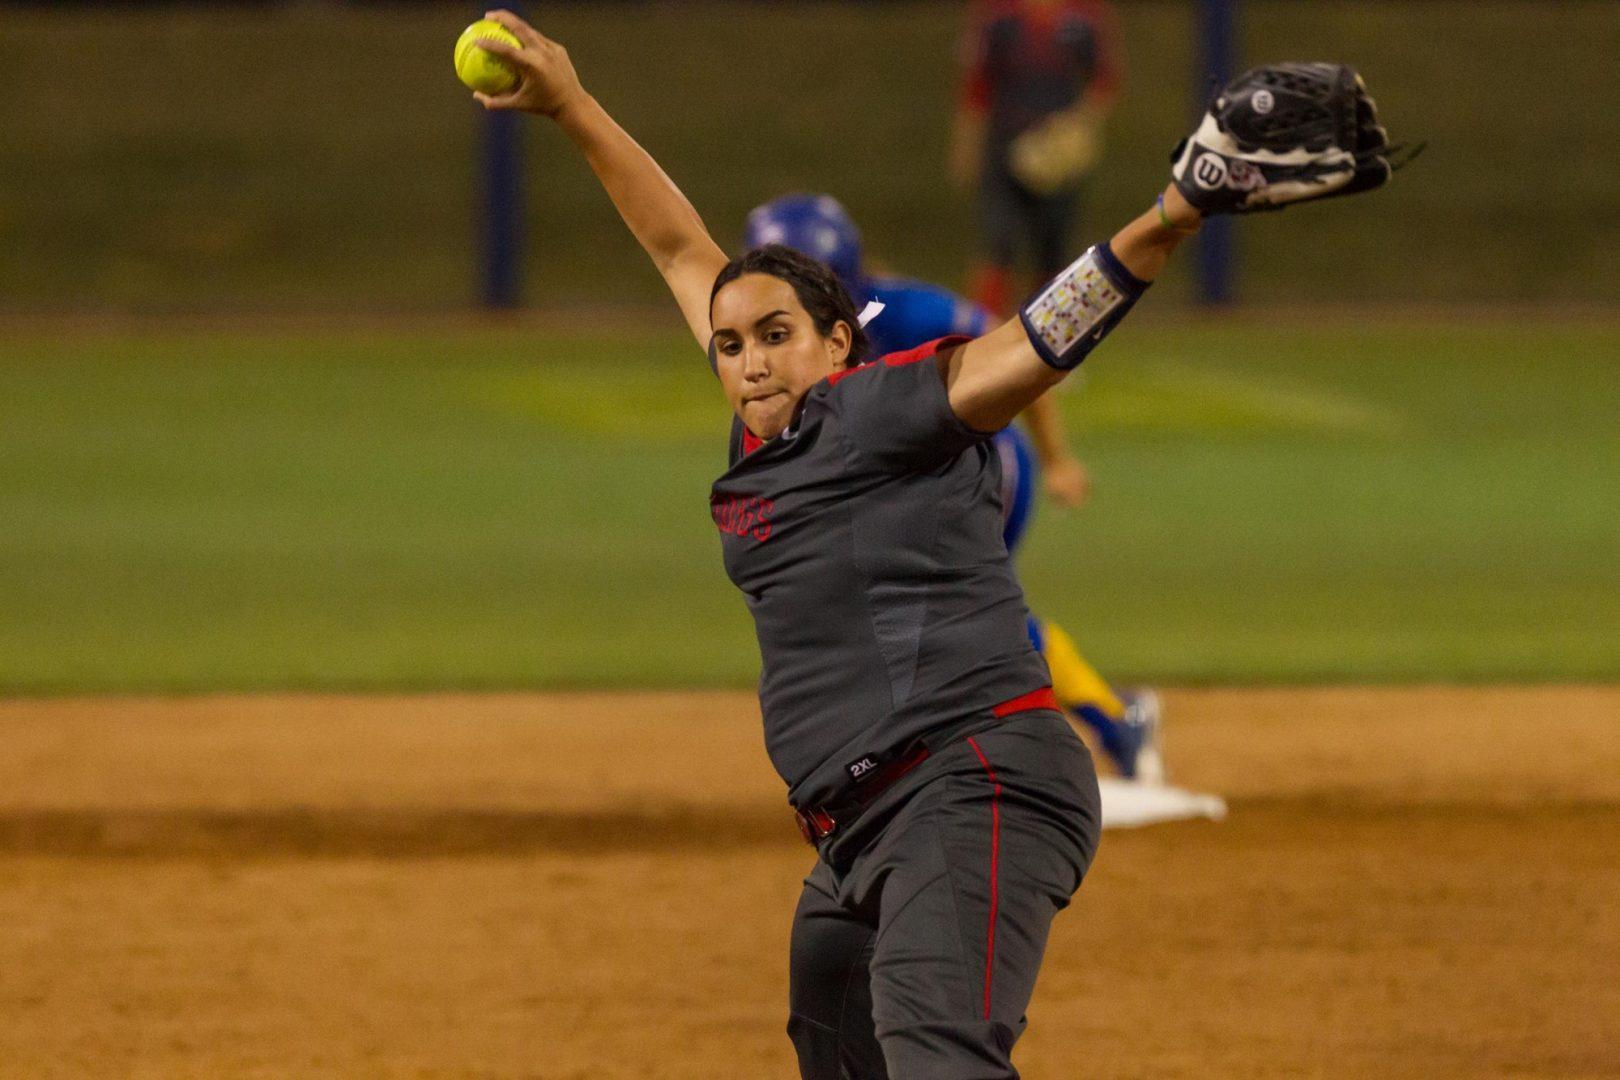 Right-handed pitcher Sarah Santana pitched fifteen innings this season as a reliever for the ‘Dogs. (Fresno State Athletics)  